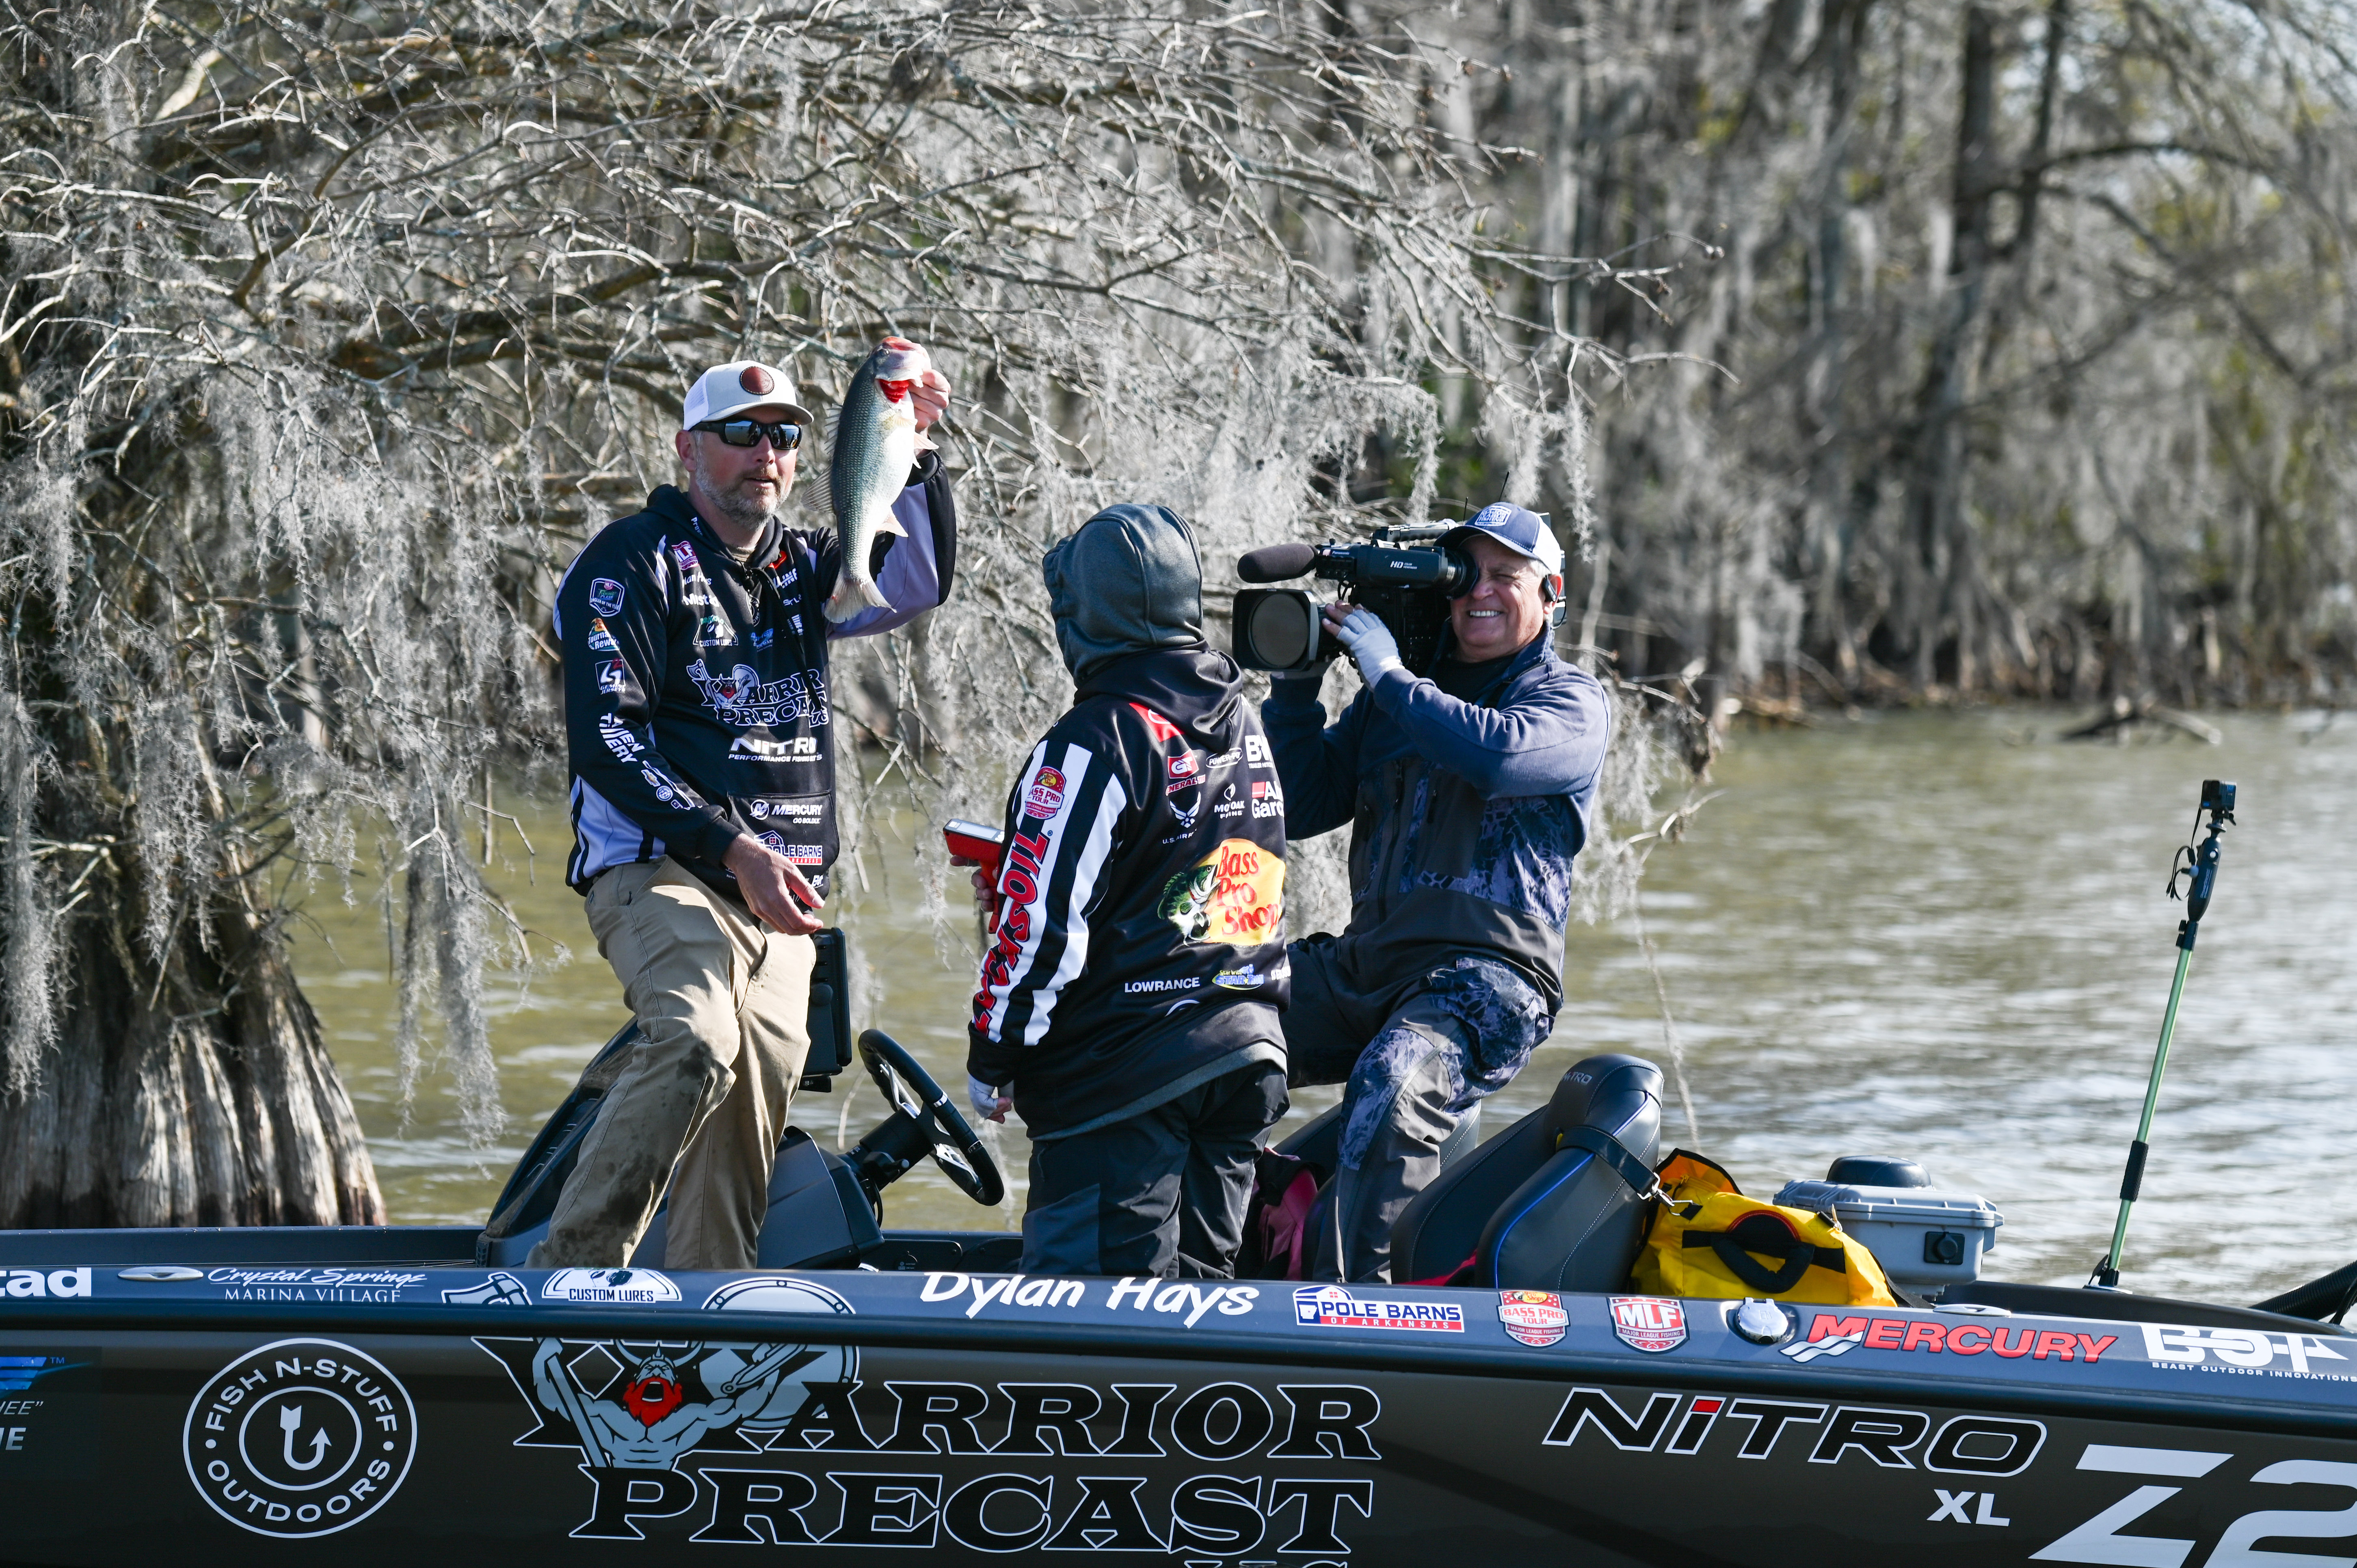 Jared Lintner Dominant in Group B at MLF Bass Pro Tour B&W Trailer Hitches  Stage One Presented by Power-Pole - Major League Fishing